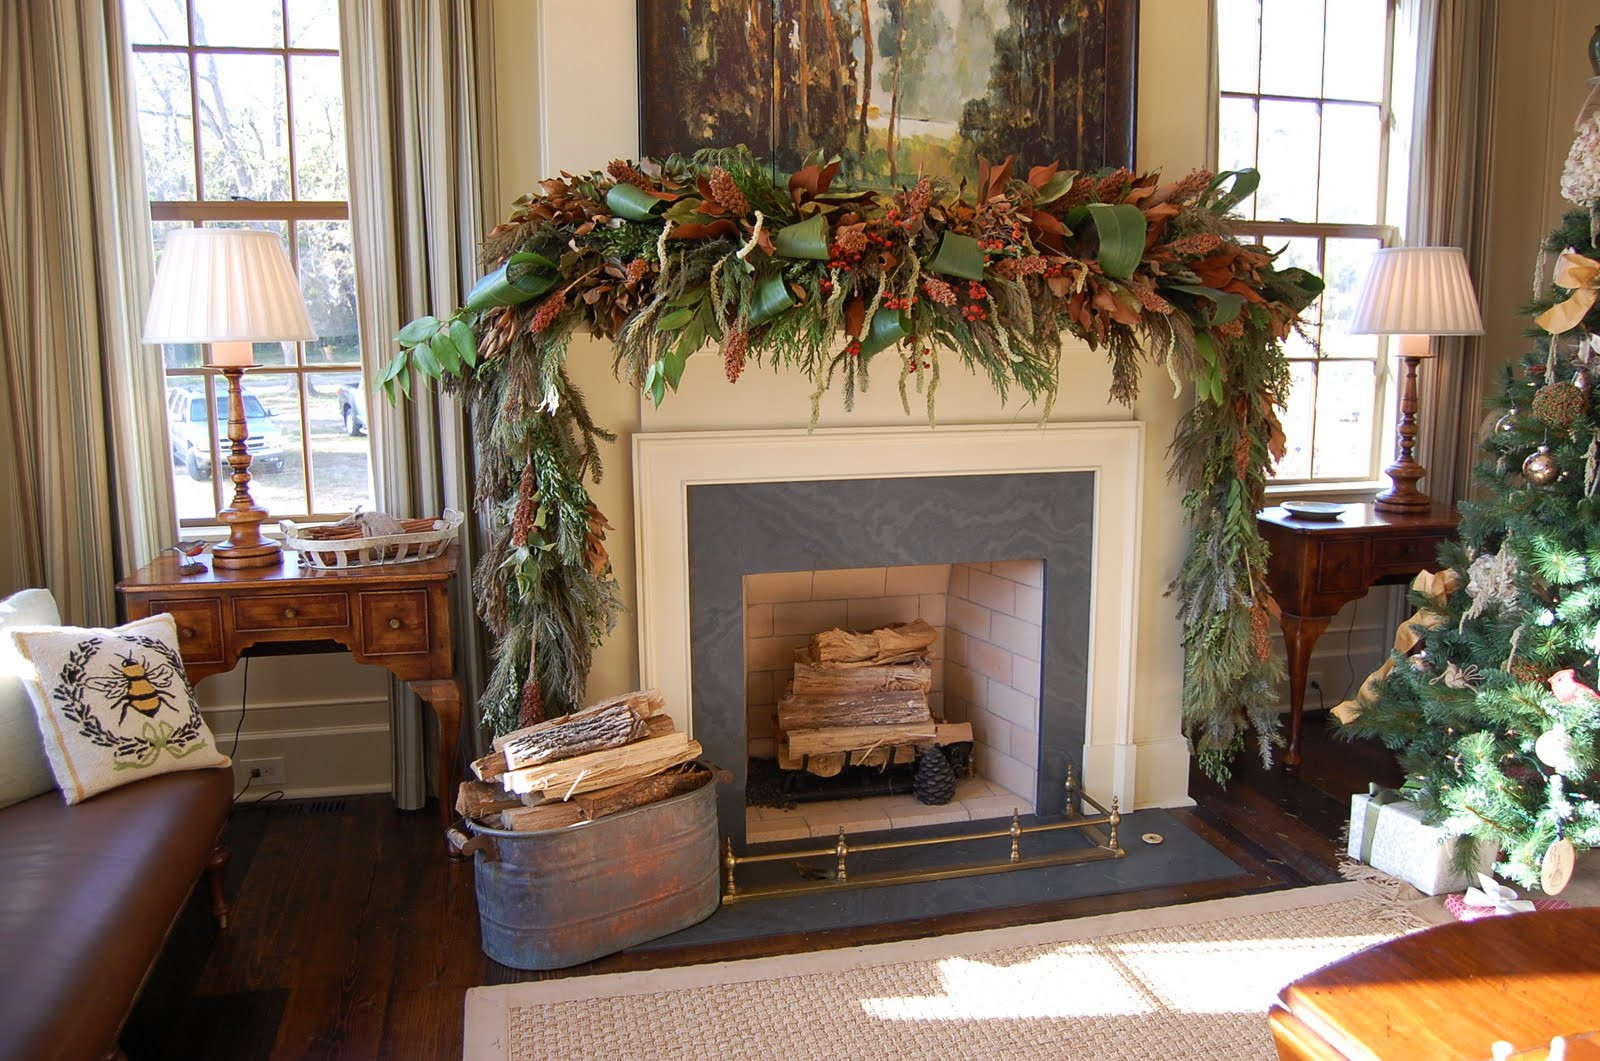 Fireplace Mantel Christmas
 Christmas Mantel Decorated with Natural Greenery in